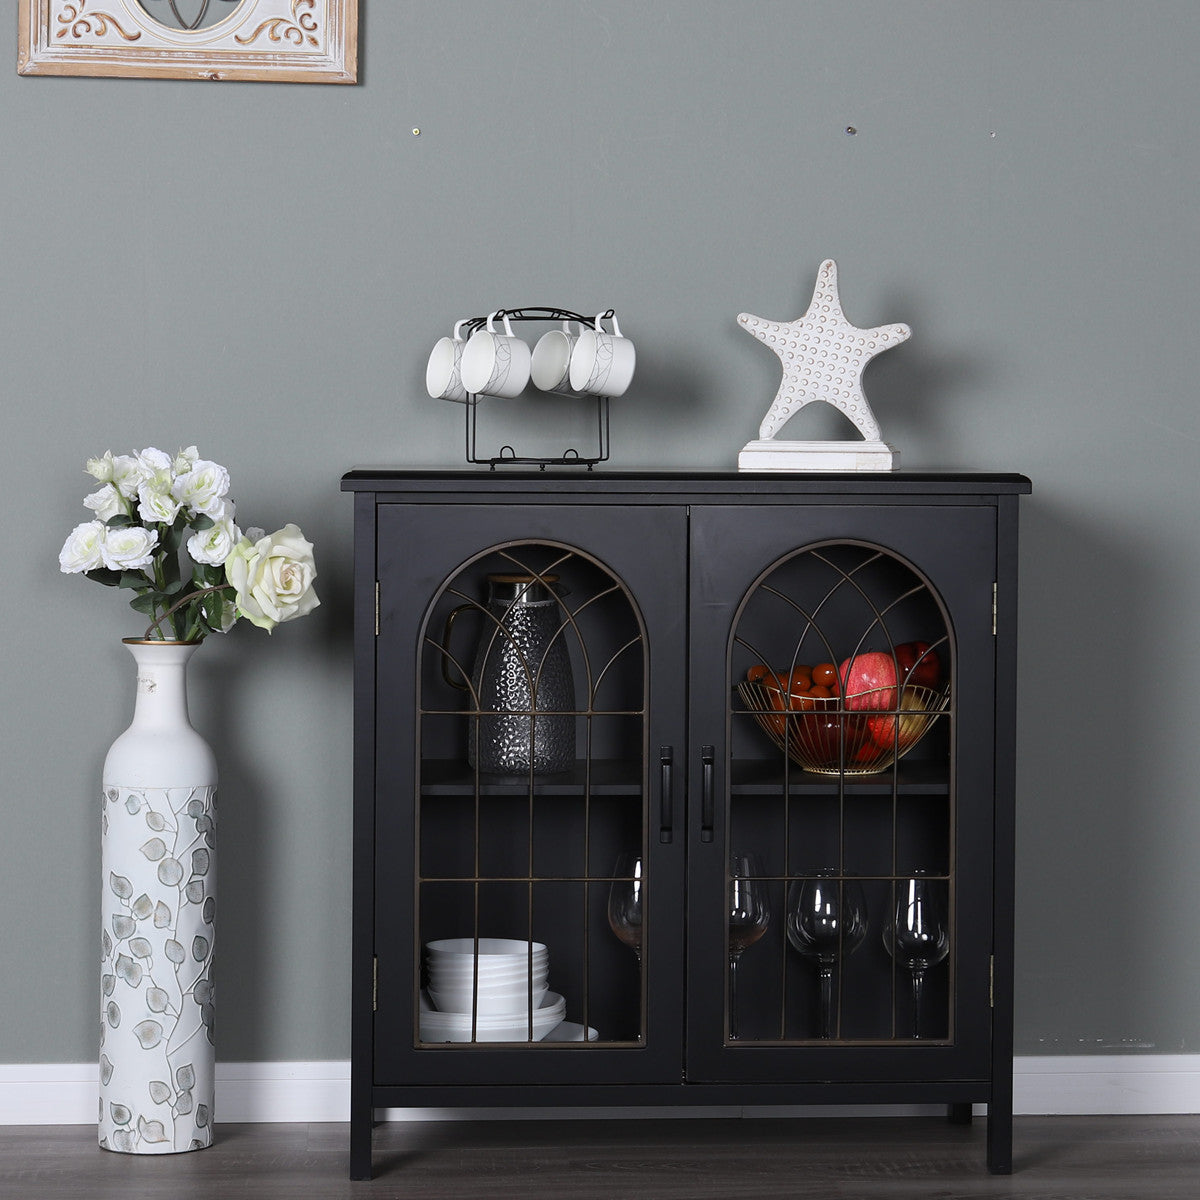 This black stylish and durable cabinet offer versatile storage options, perfect for your hallway, living room, or kitchen, add both elegance and functionality to your space.